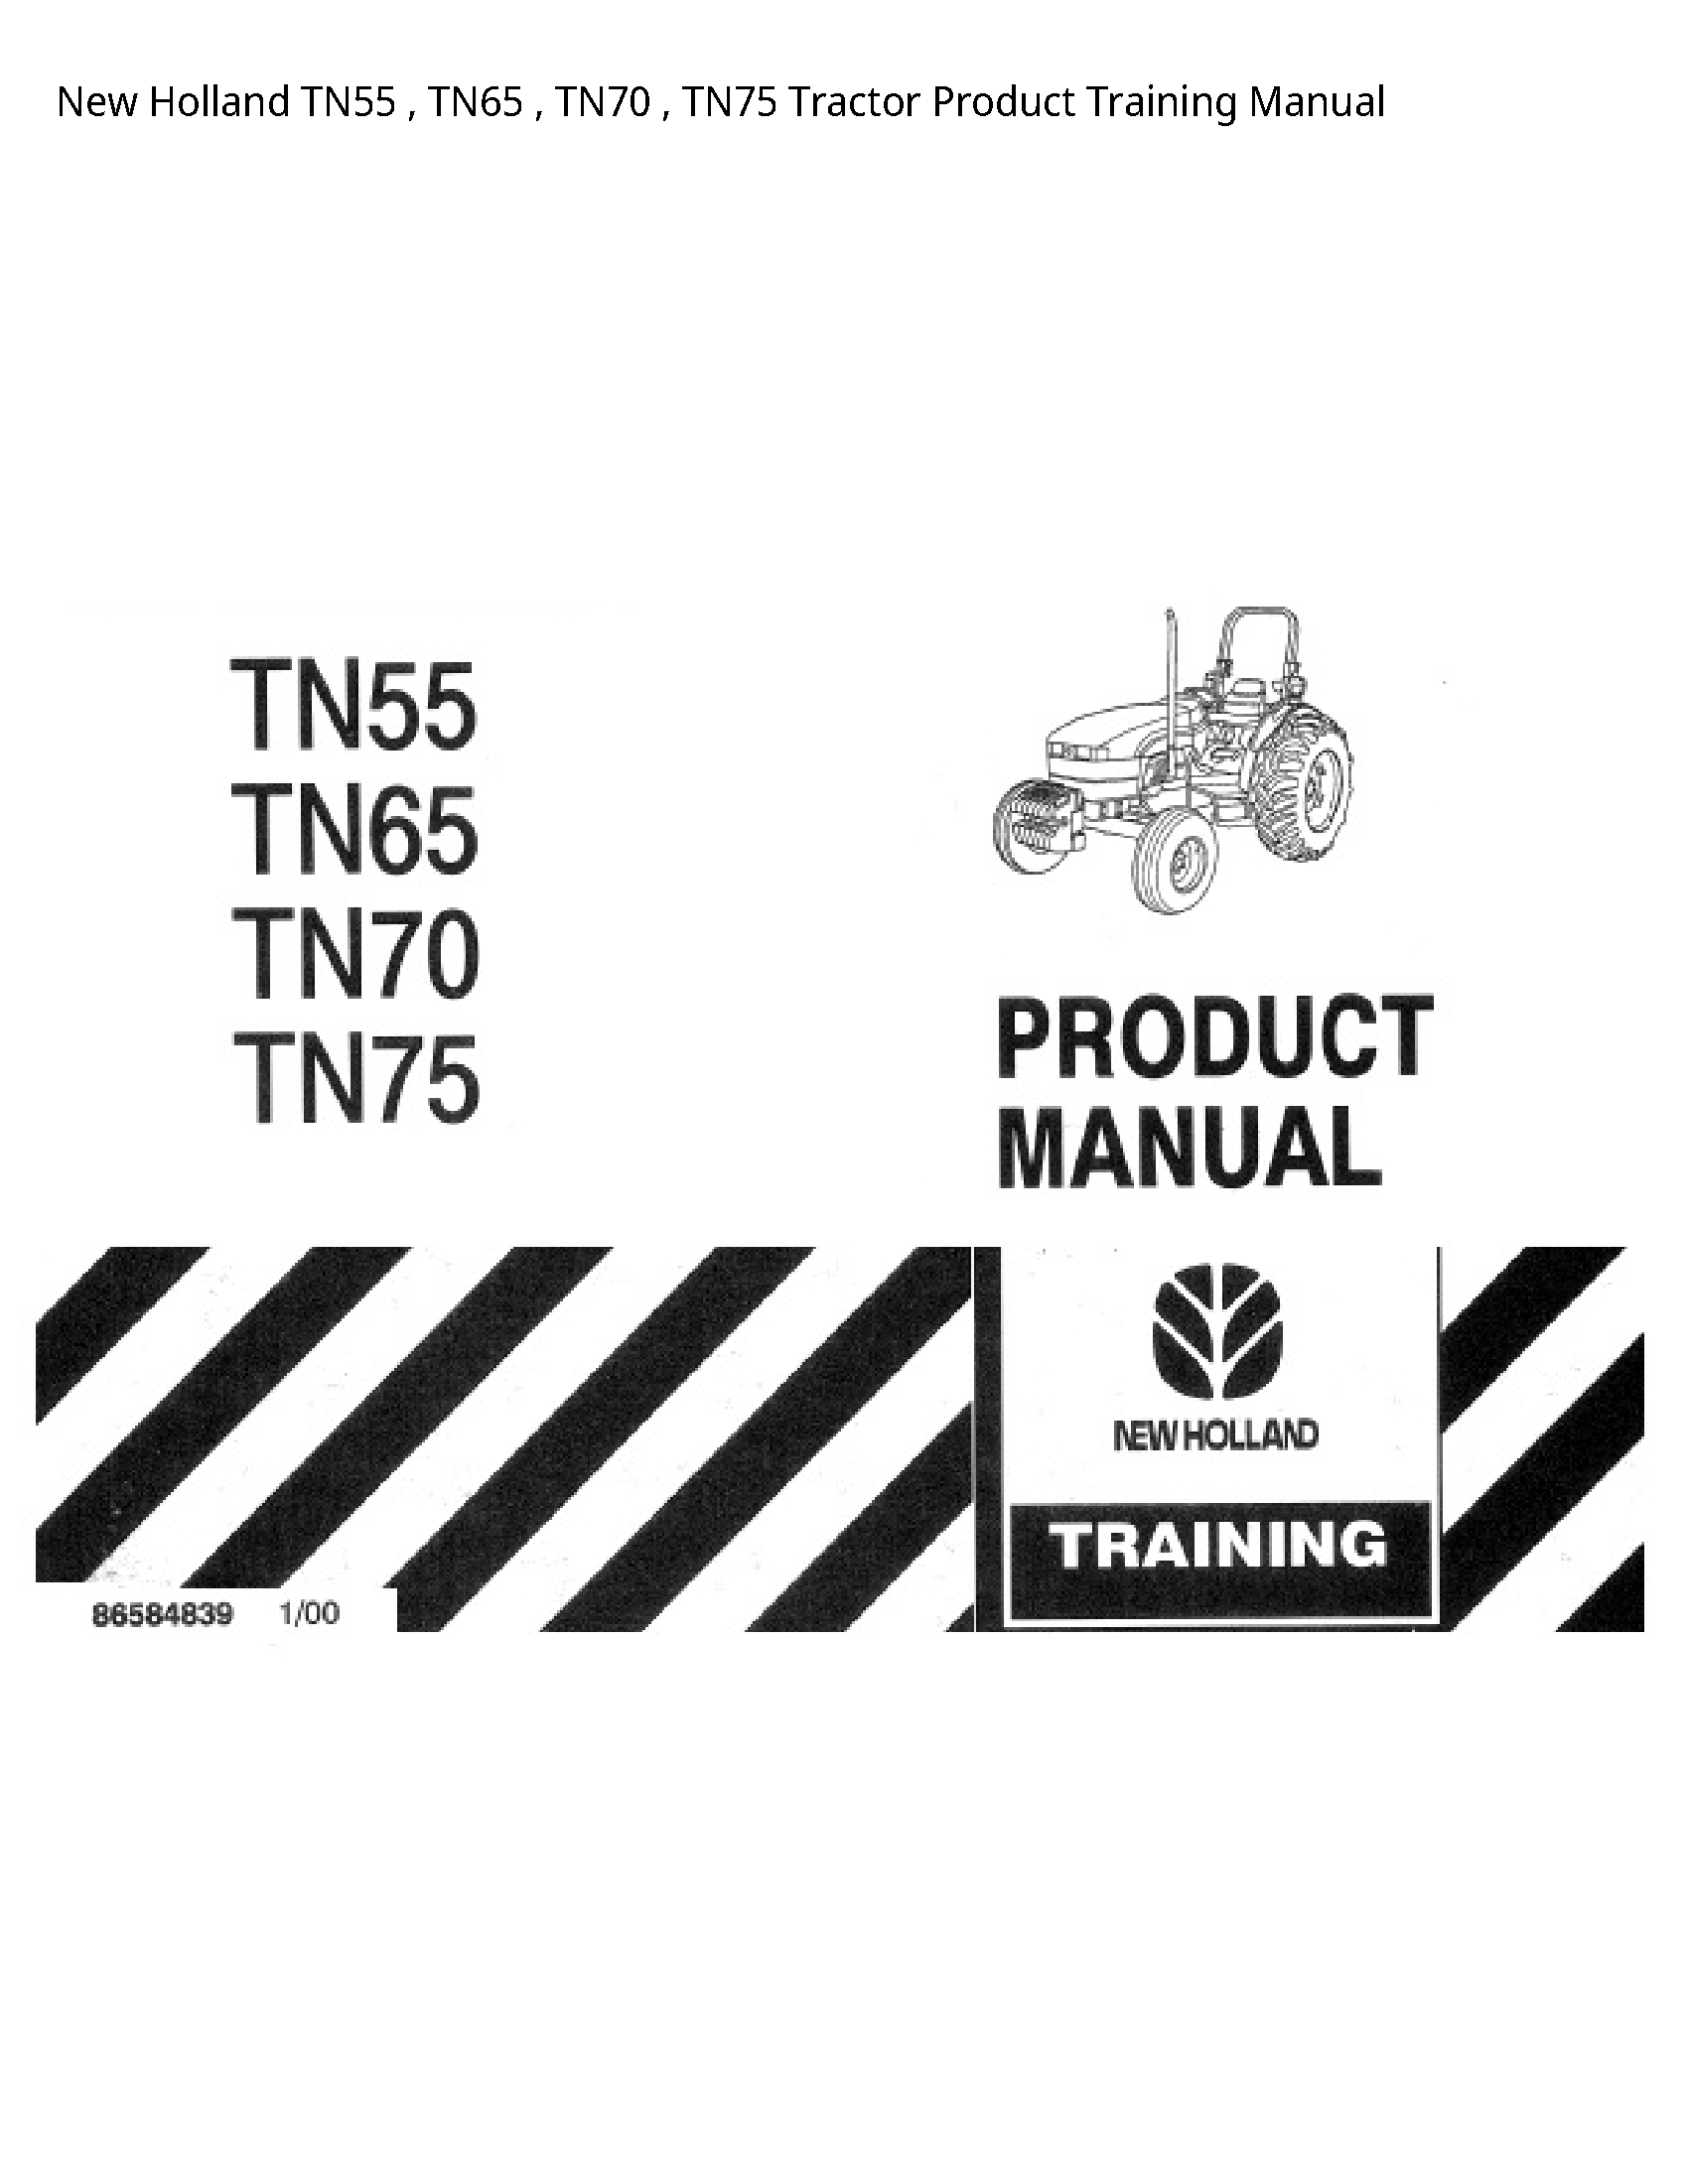 New Holland TN55 Tractor Product Training manual